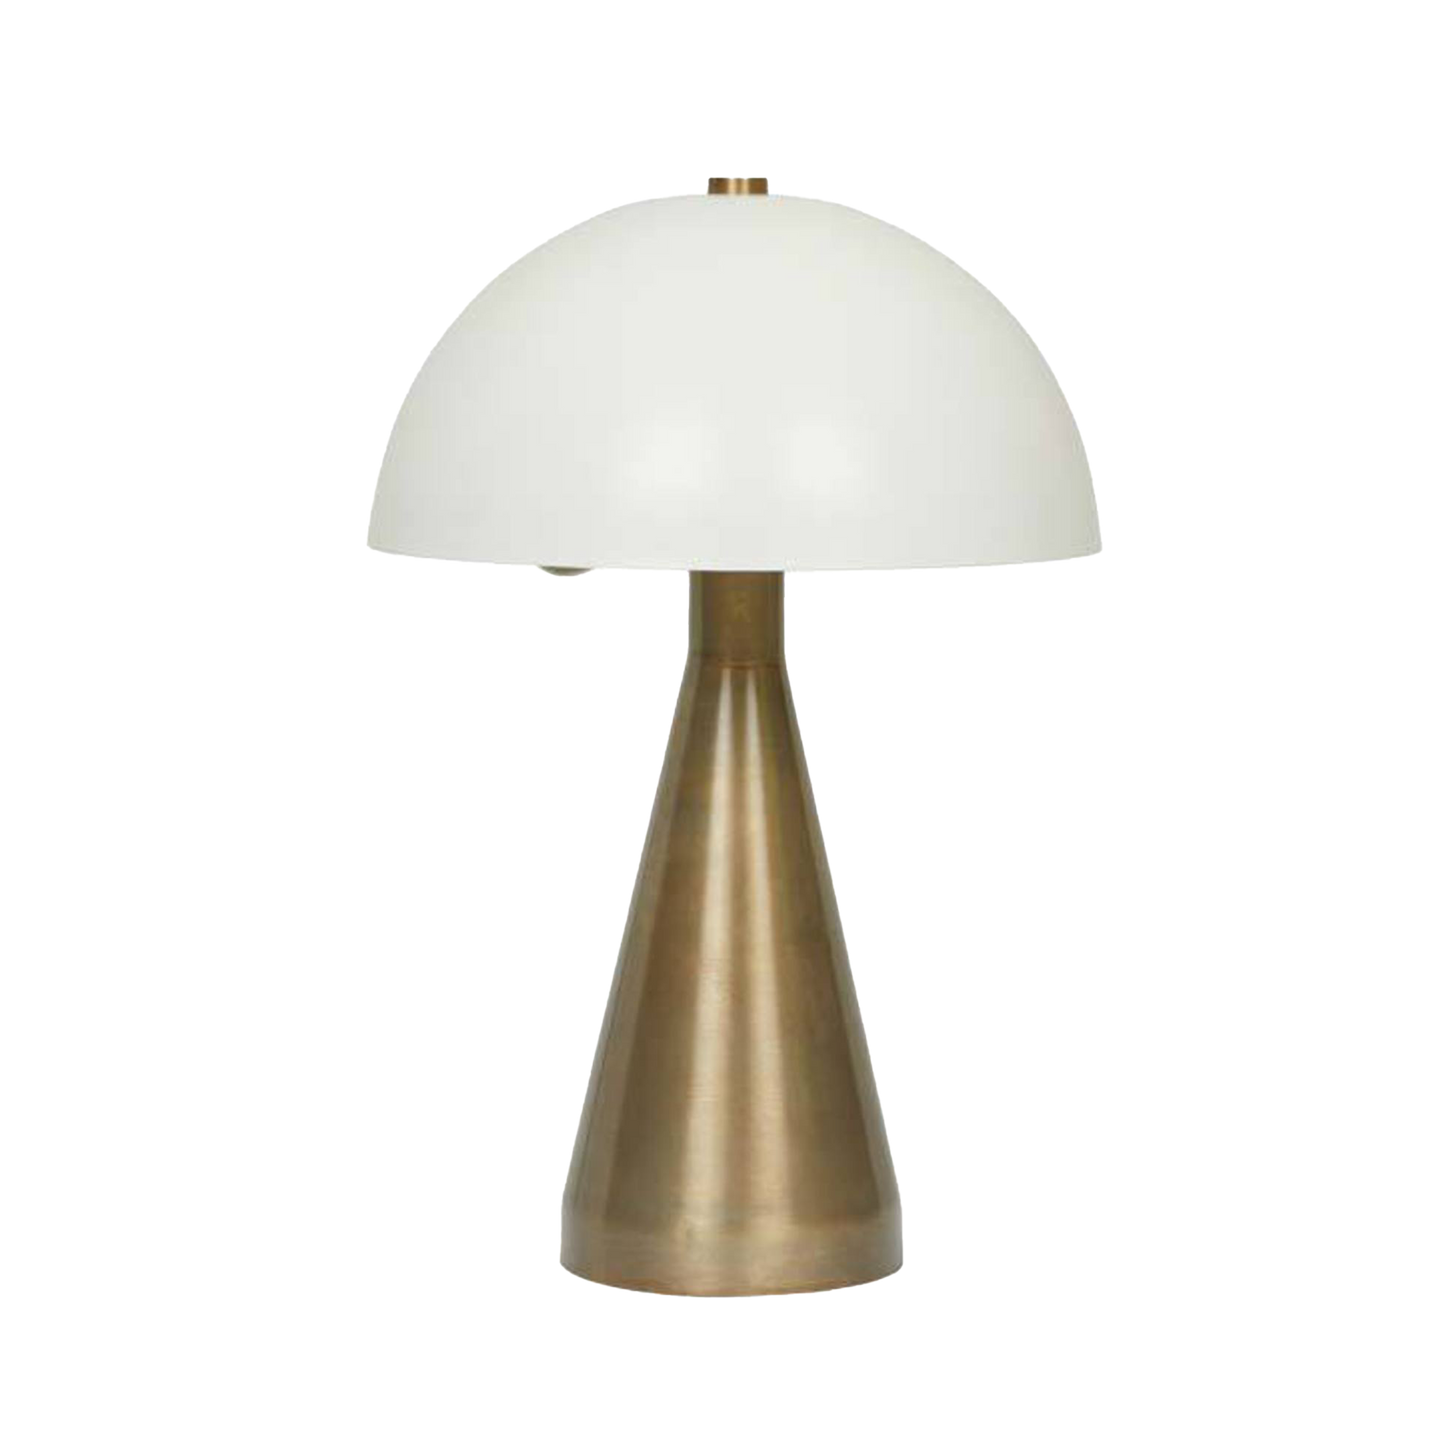 Easton dome table lamp ivory/brass